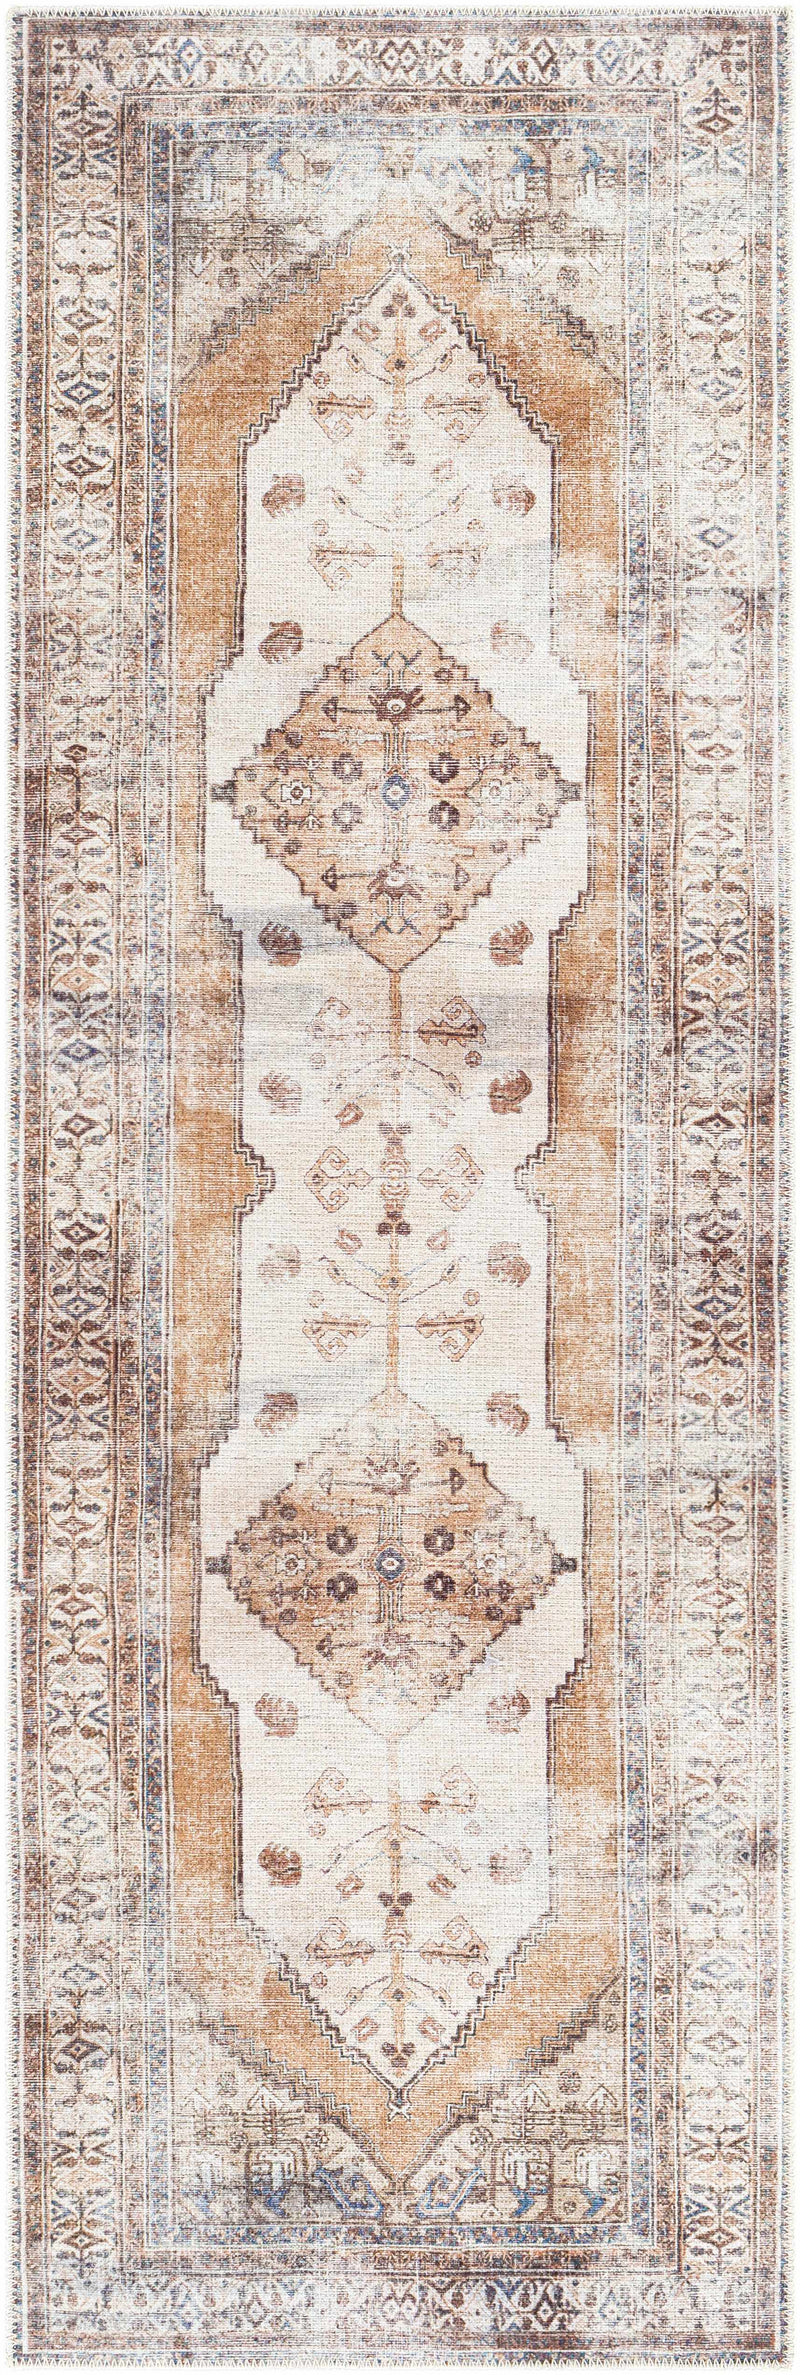 Boutique Rugs - Arncliffe Washable Area Rug Rugs Boutique Rugs 2'7" x 7'10" Runner 